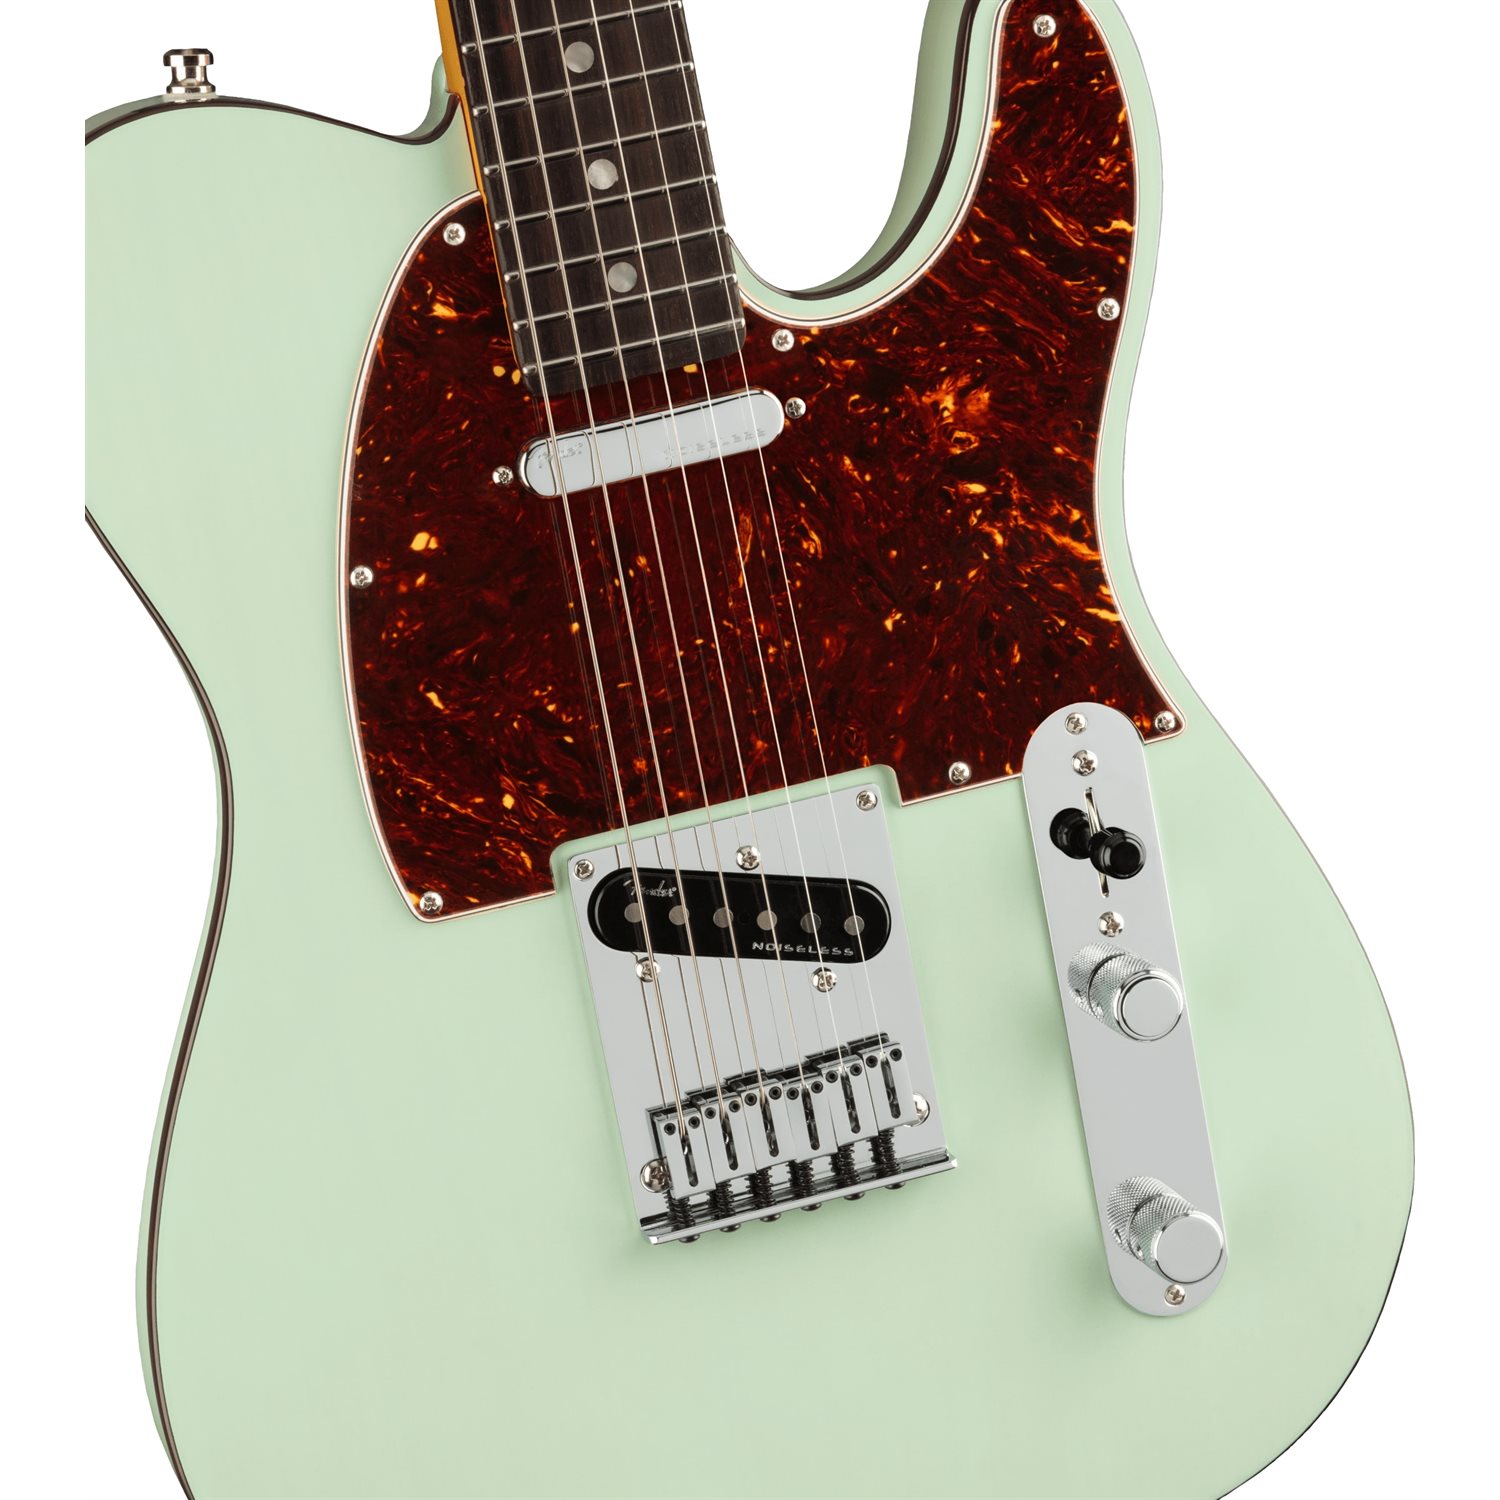 FENDER - AMERICAN ULTRA LUXE TELECASTER - Rosewood Fingerboard